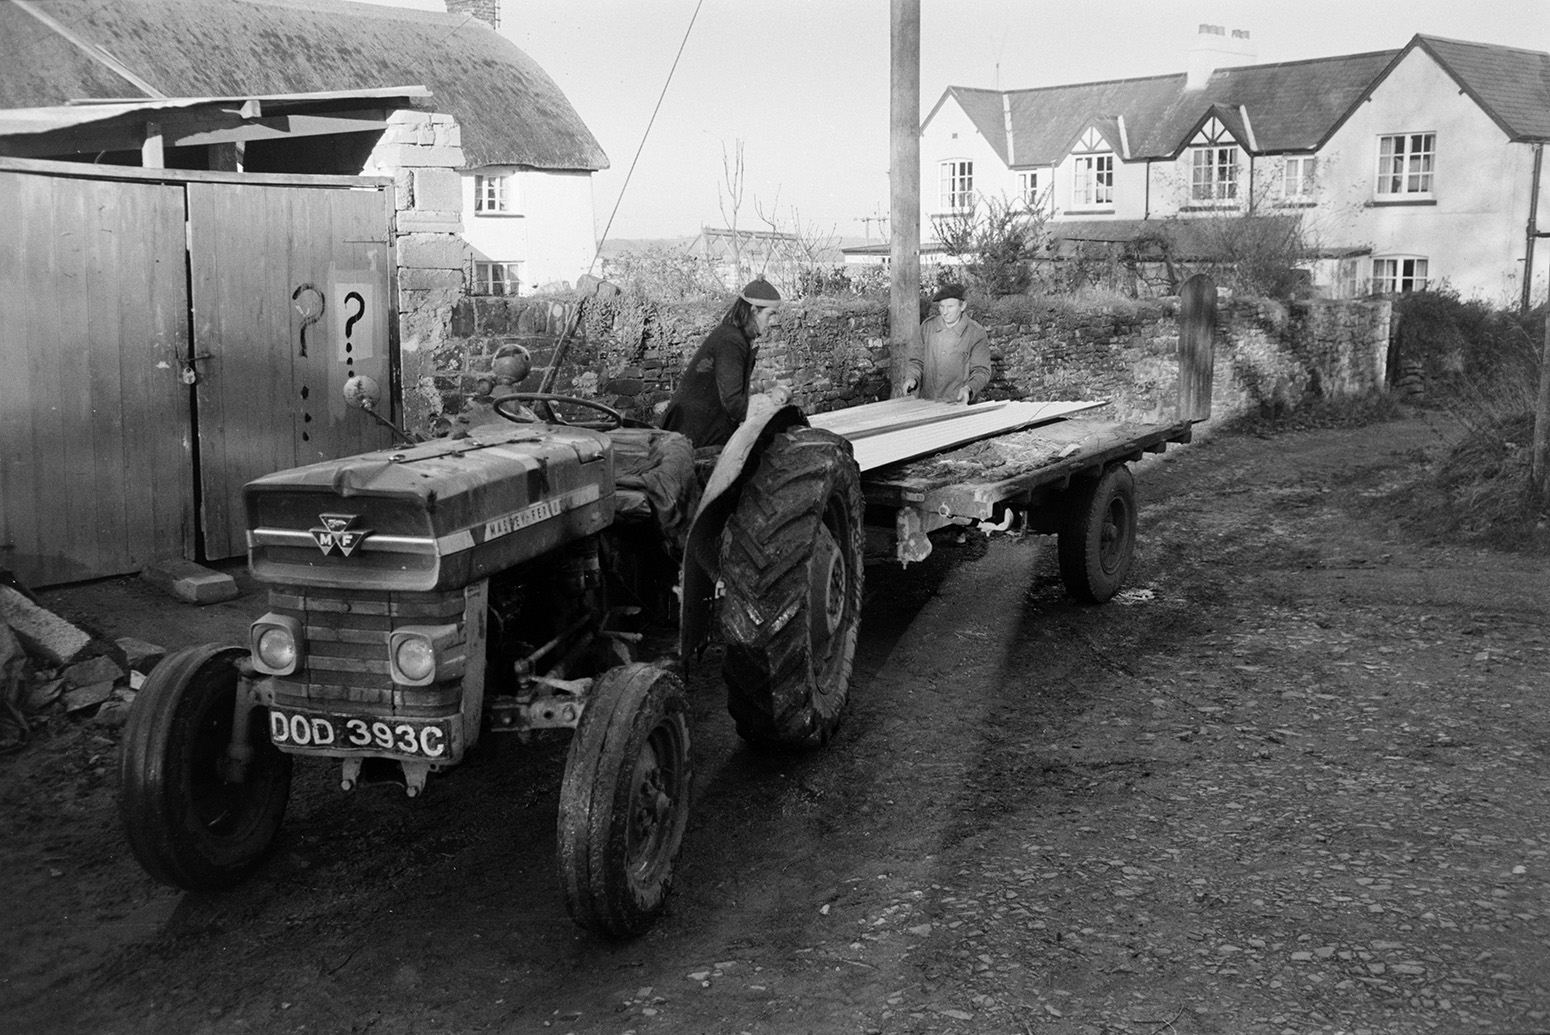 Derek Bright, in the foreground, and Ivor Bourne unloading sheets of corrugated iron from a tractor and trailer, to be used on a barn exterior, at Beaford. Houses and a thatched cottage are visible in the background. The farm was also known as Jeffrys.